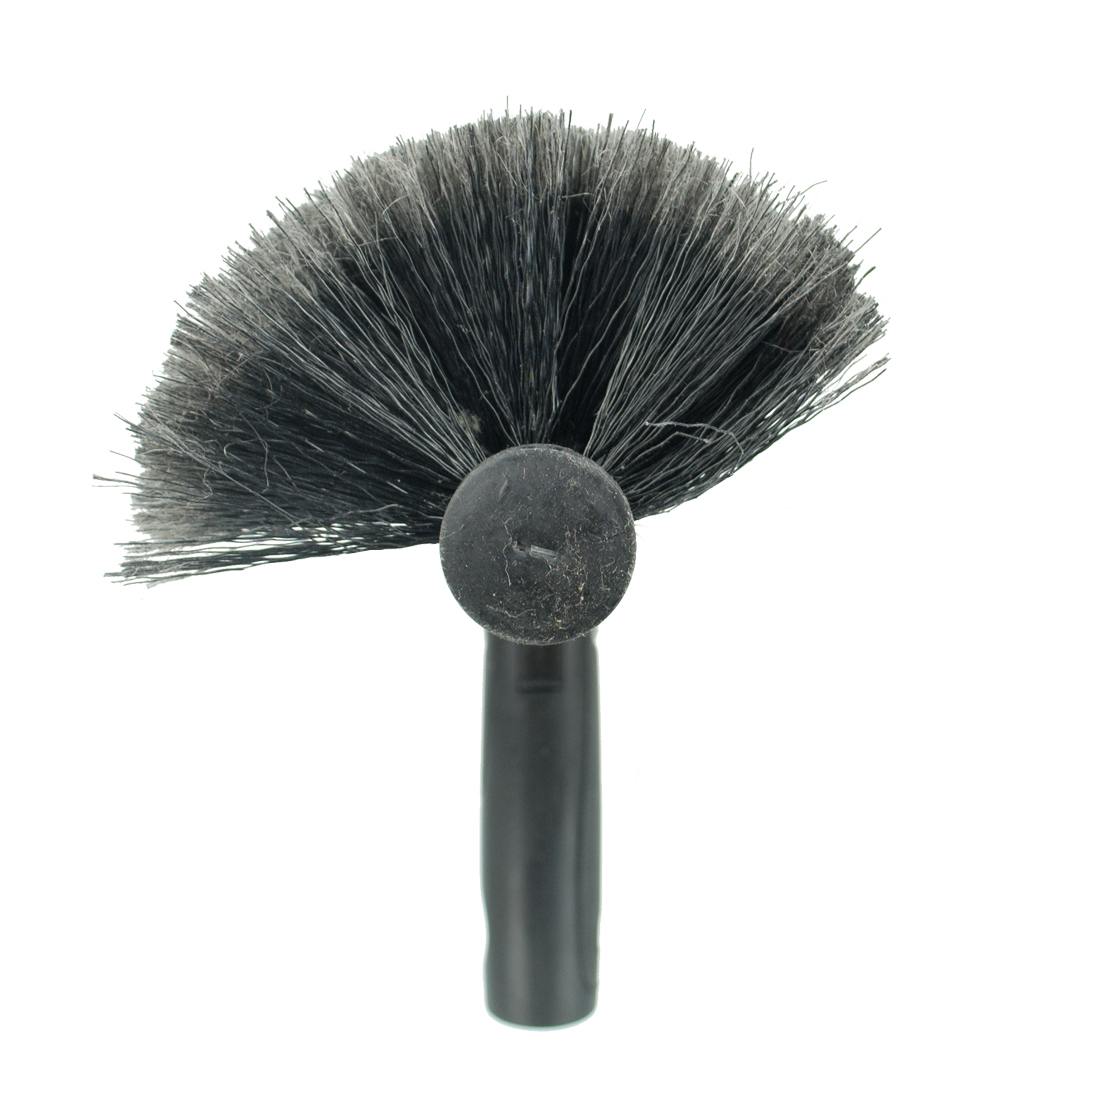 Window Cleaning Brushes - Ettore, Maykker, Unger, and more